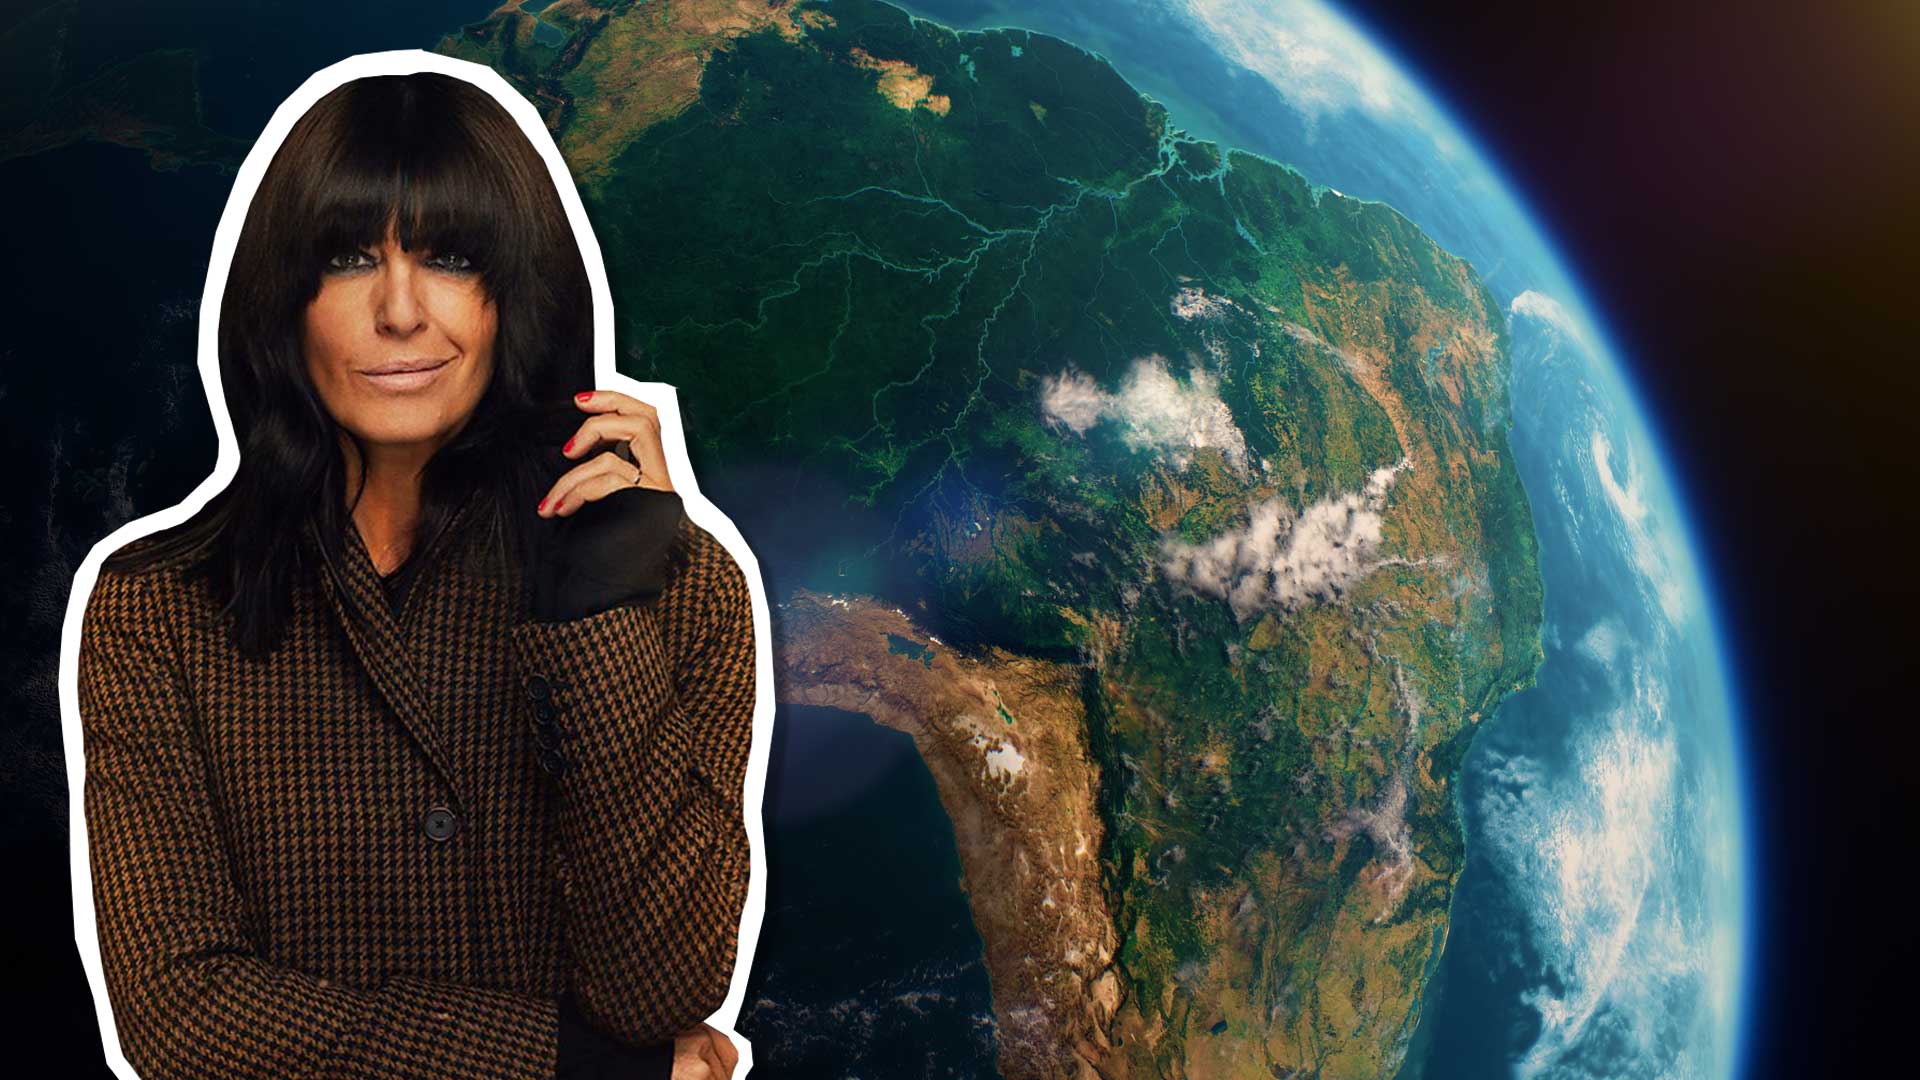 Claudia Winkleman standing in front of the continent of South America